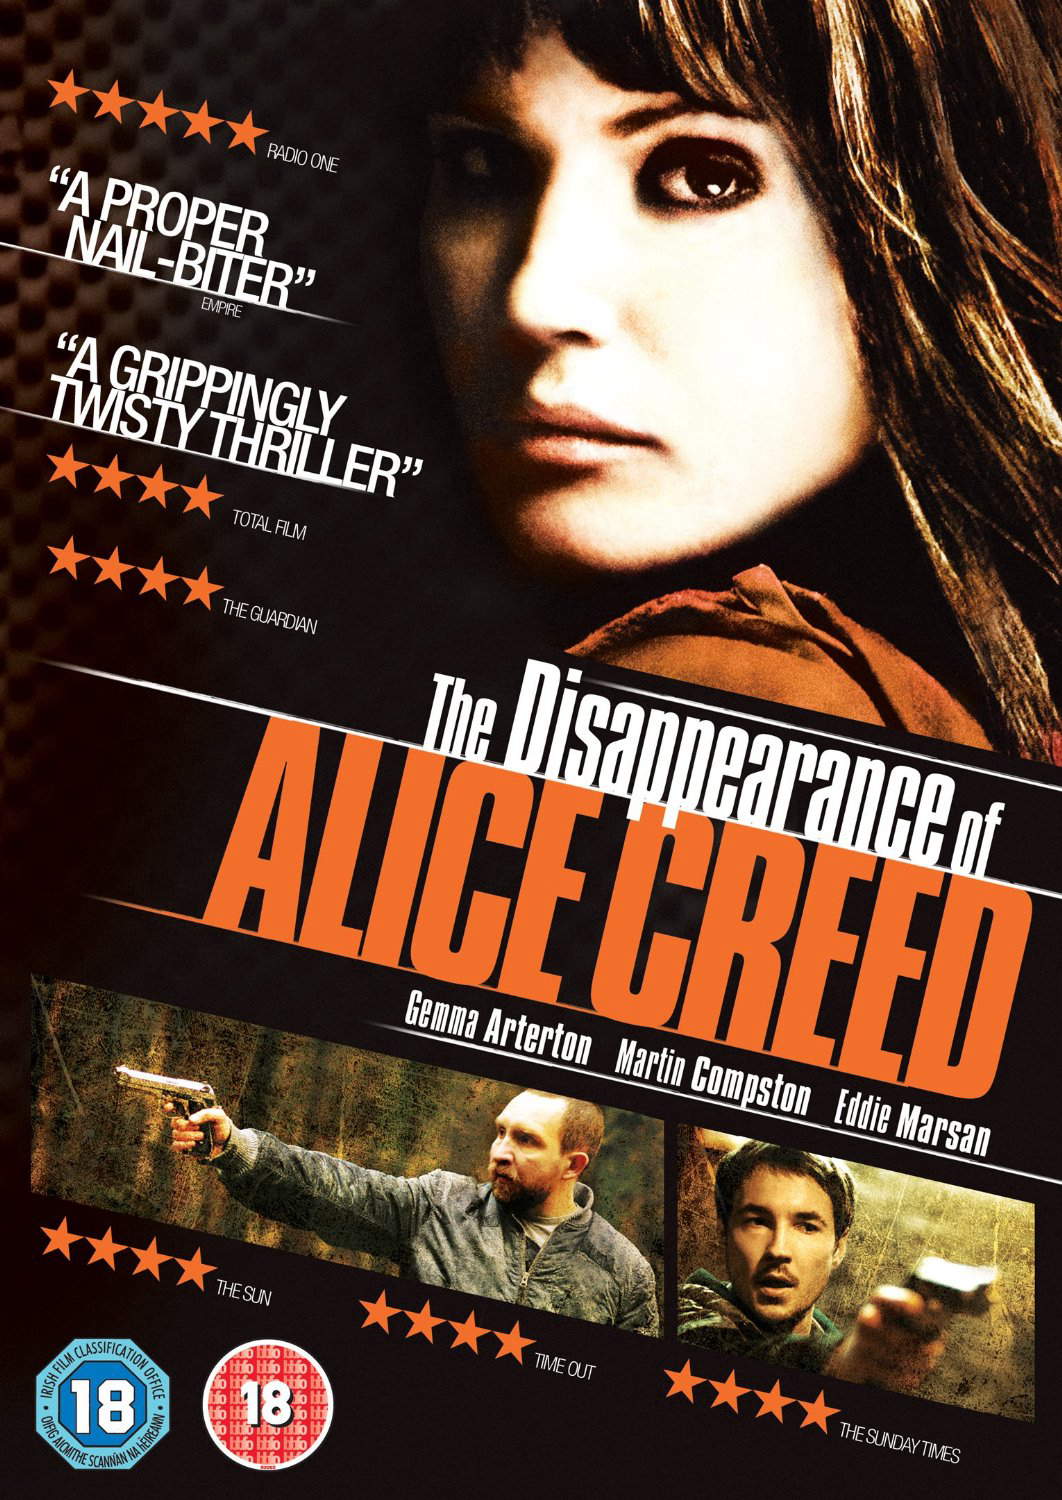 Poster Phim Vụ Bắt Cóc Alice Creed (The Disappearance of Alice Creed)